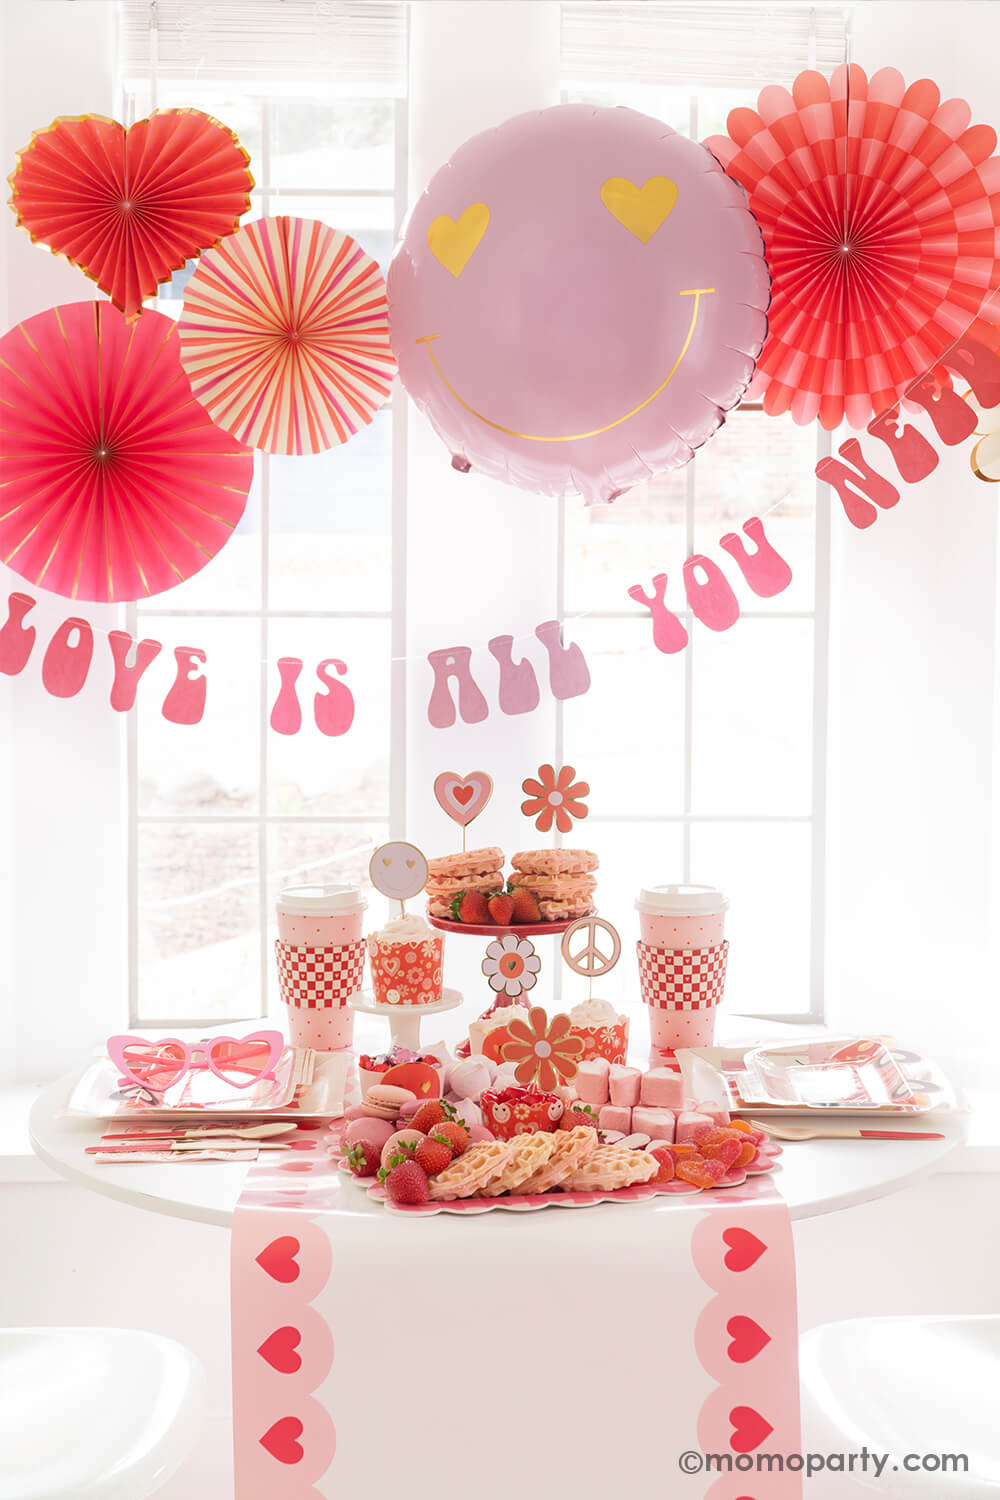 A Valentine's Day celebration featuring Momo Party's Groovy Valentine's Day Party box set up with pink and red paper fans in heart shape and a "love is all you need" banner in retro type hung below the paper fans. On the table you can see a sweet board featuring treats and snacks in red and pink colors including heart shaped waffles, strawberries, macarons, marshmallows etc. Next to the desert board featured retro inspired Valentine's plates, party cups and napkins, a perfect inspo for Vday celebration!